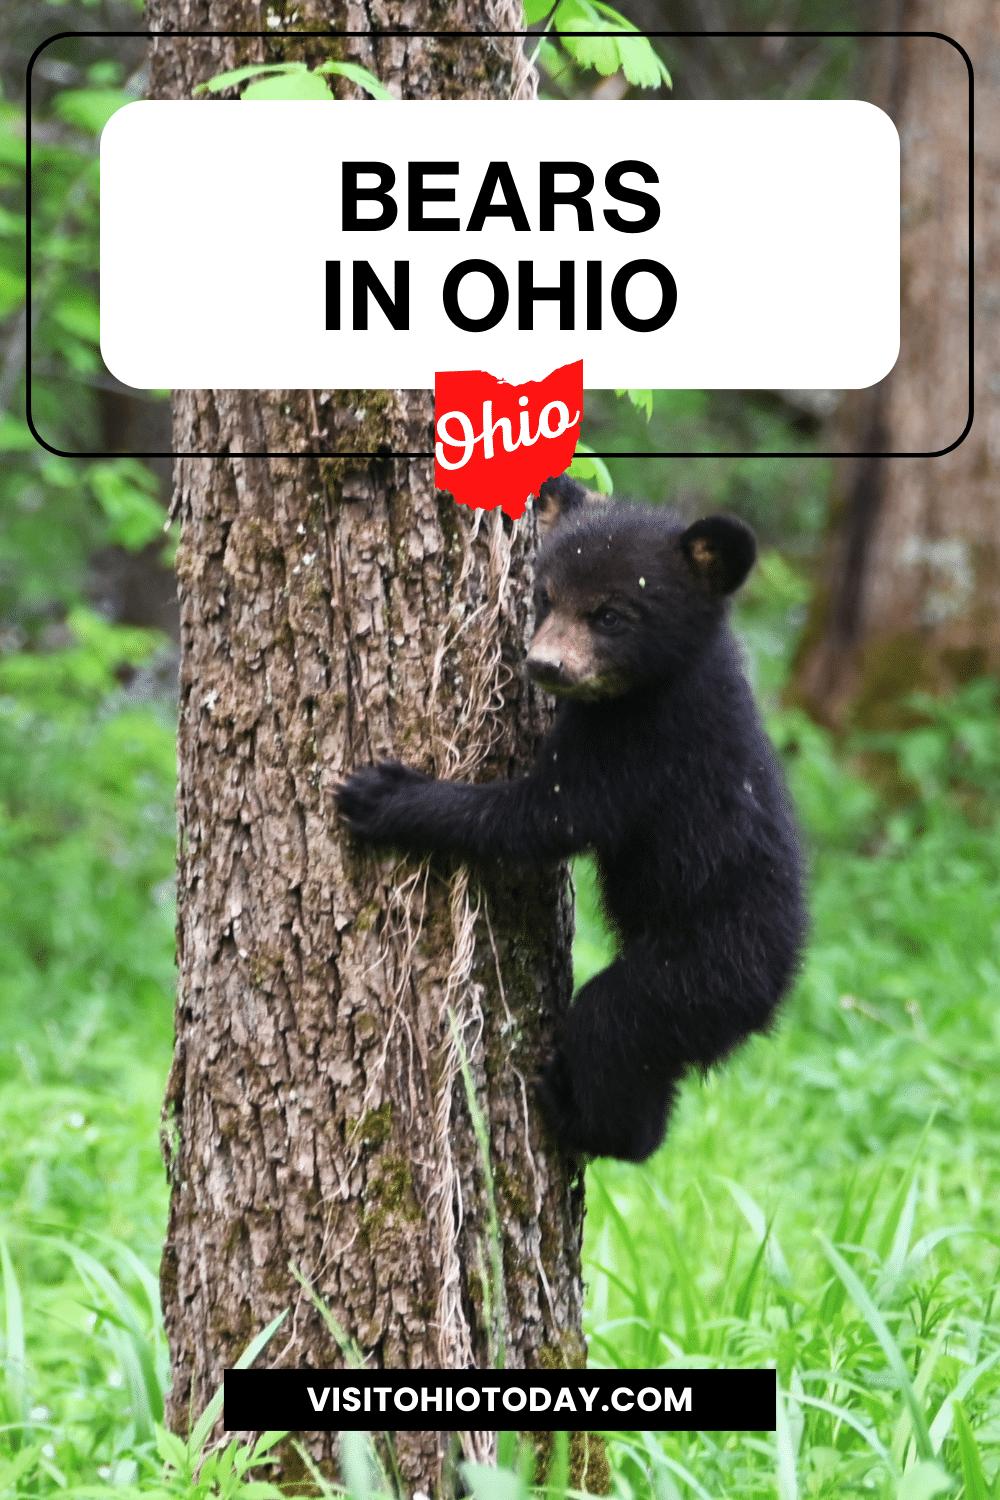 Bears used to roam around Ohio in large numbers. Whilst there are not as many bears in Ohio today, there is still a population of Black Bears that call Ohio home.